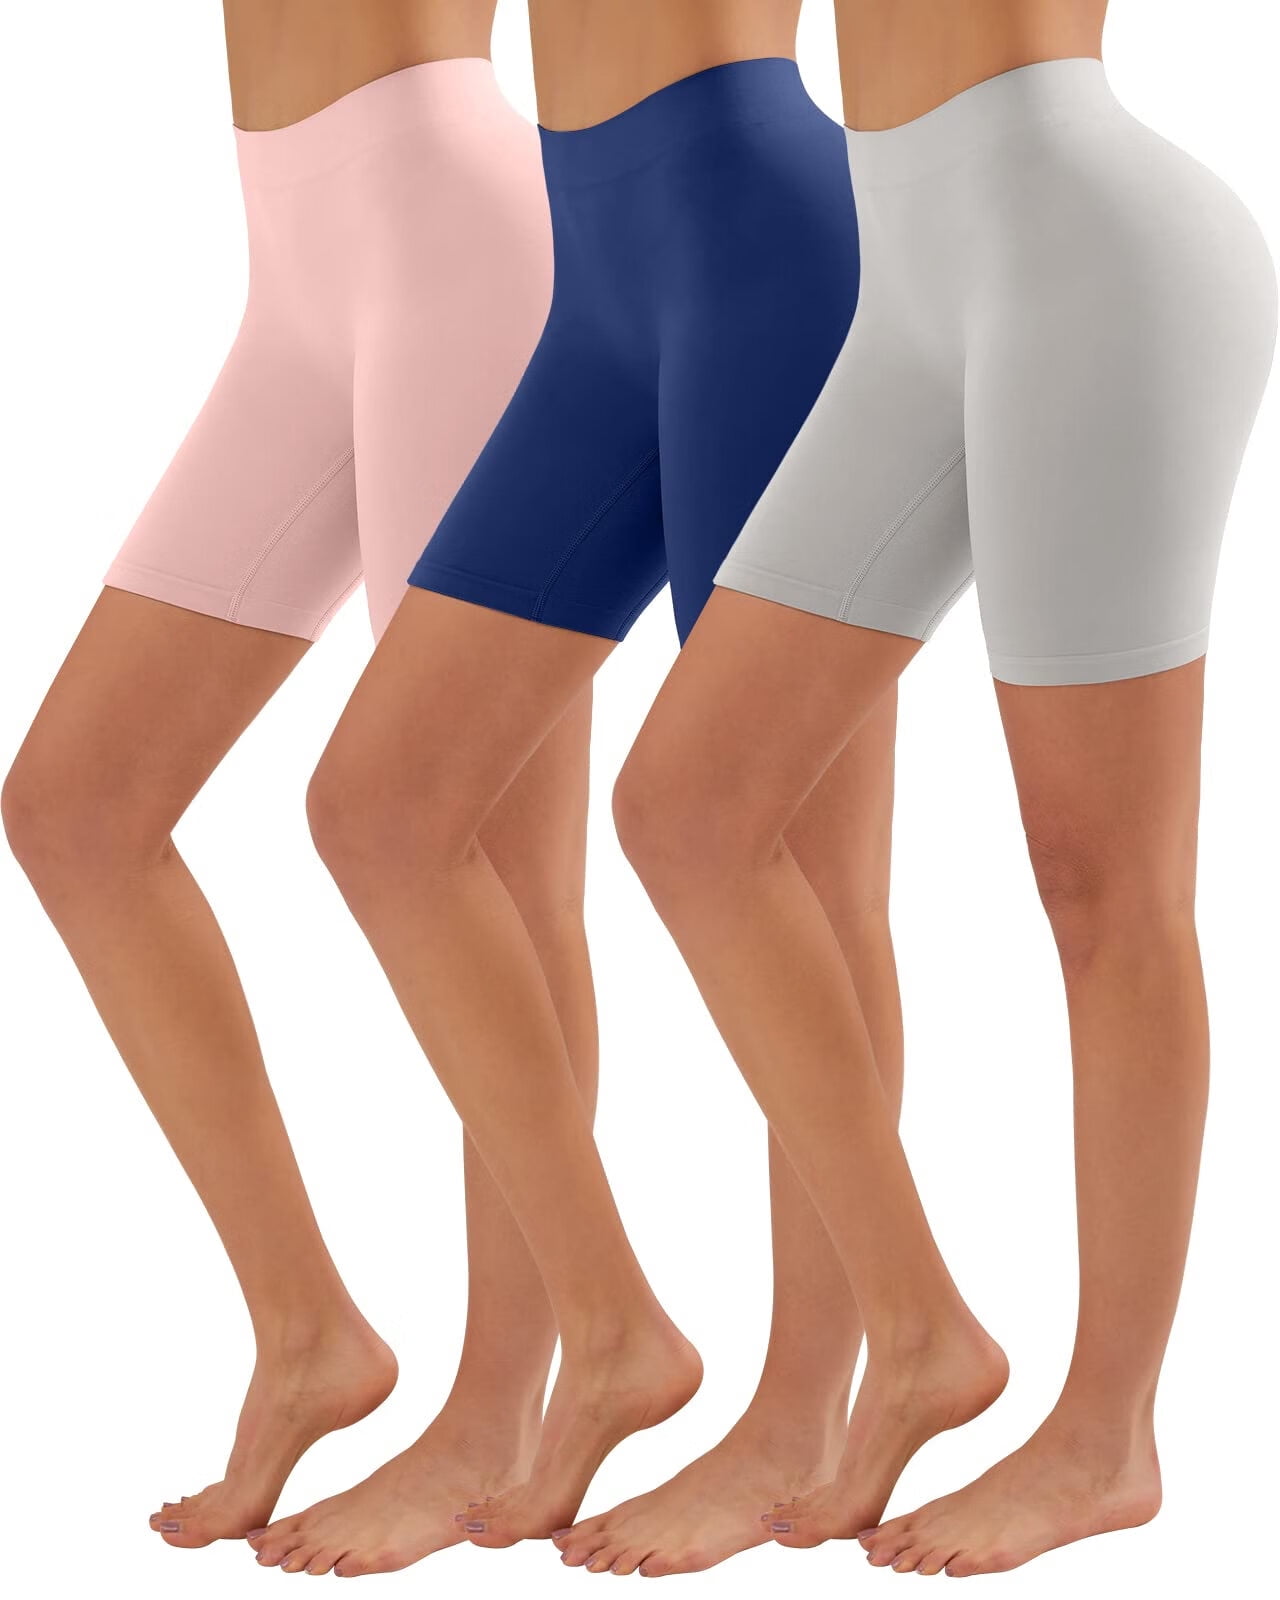 Multicolor Womens Slip Shorts for Under Dresses,Seamless Stretchy Buttlift  Panties,Soft Mid-Thigh Anti-ChafingUnderwear Shorts for Yoga/Bike/Workout-3  Pack 